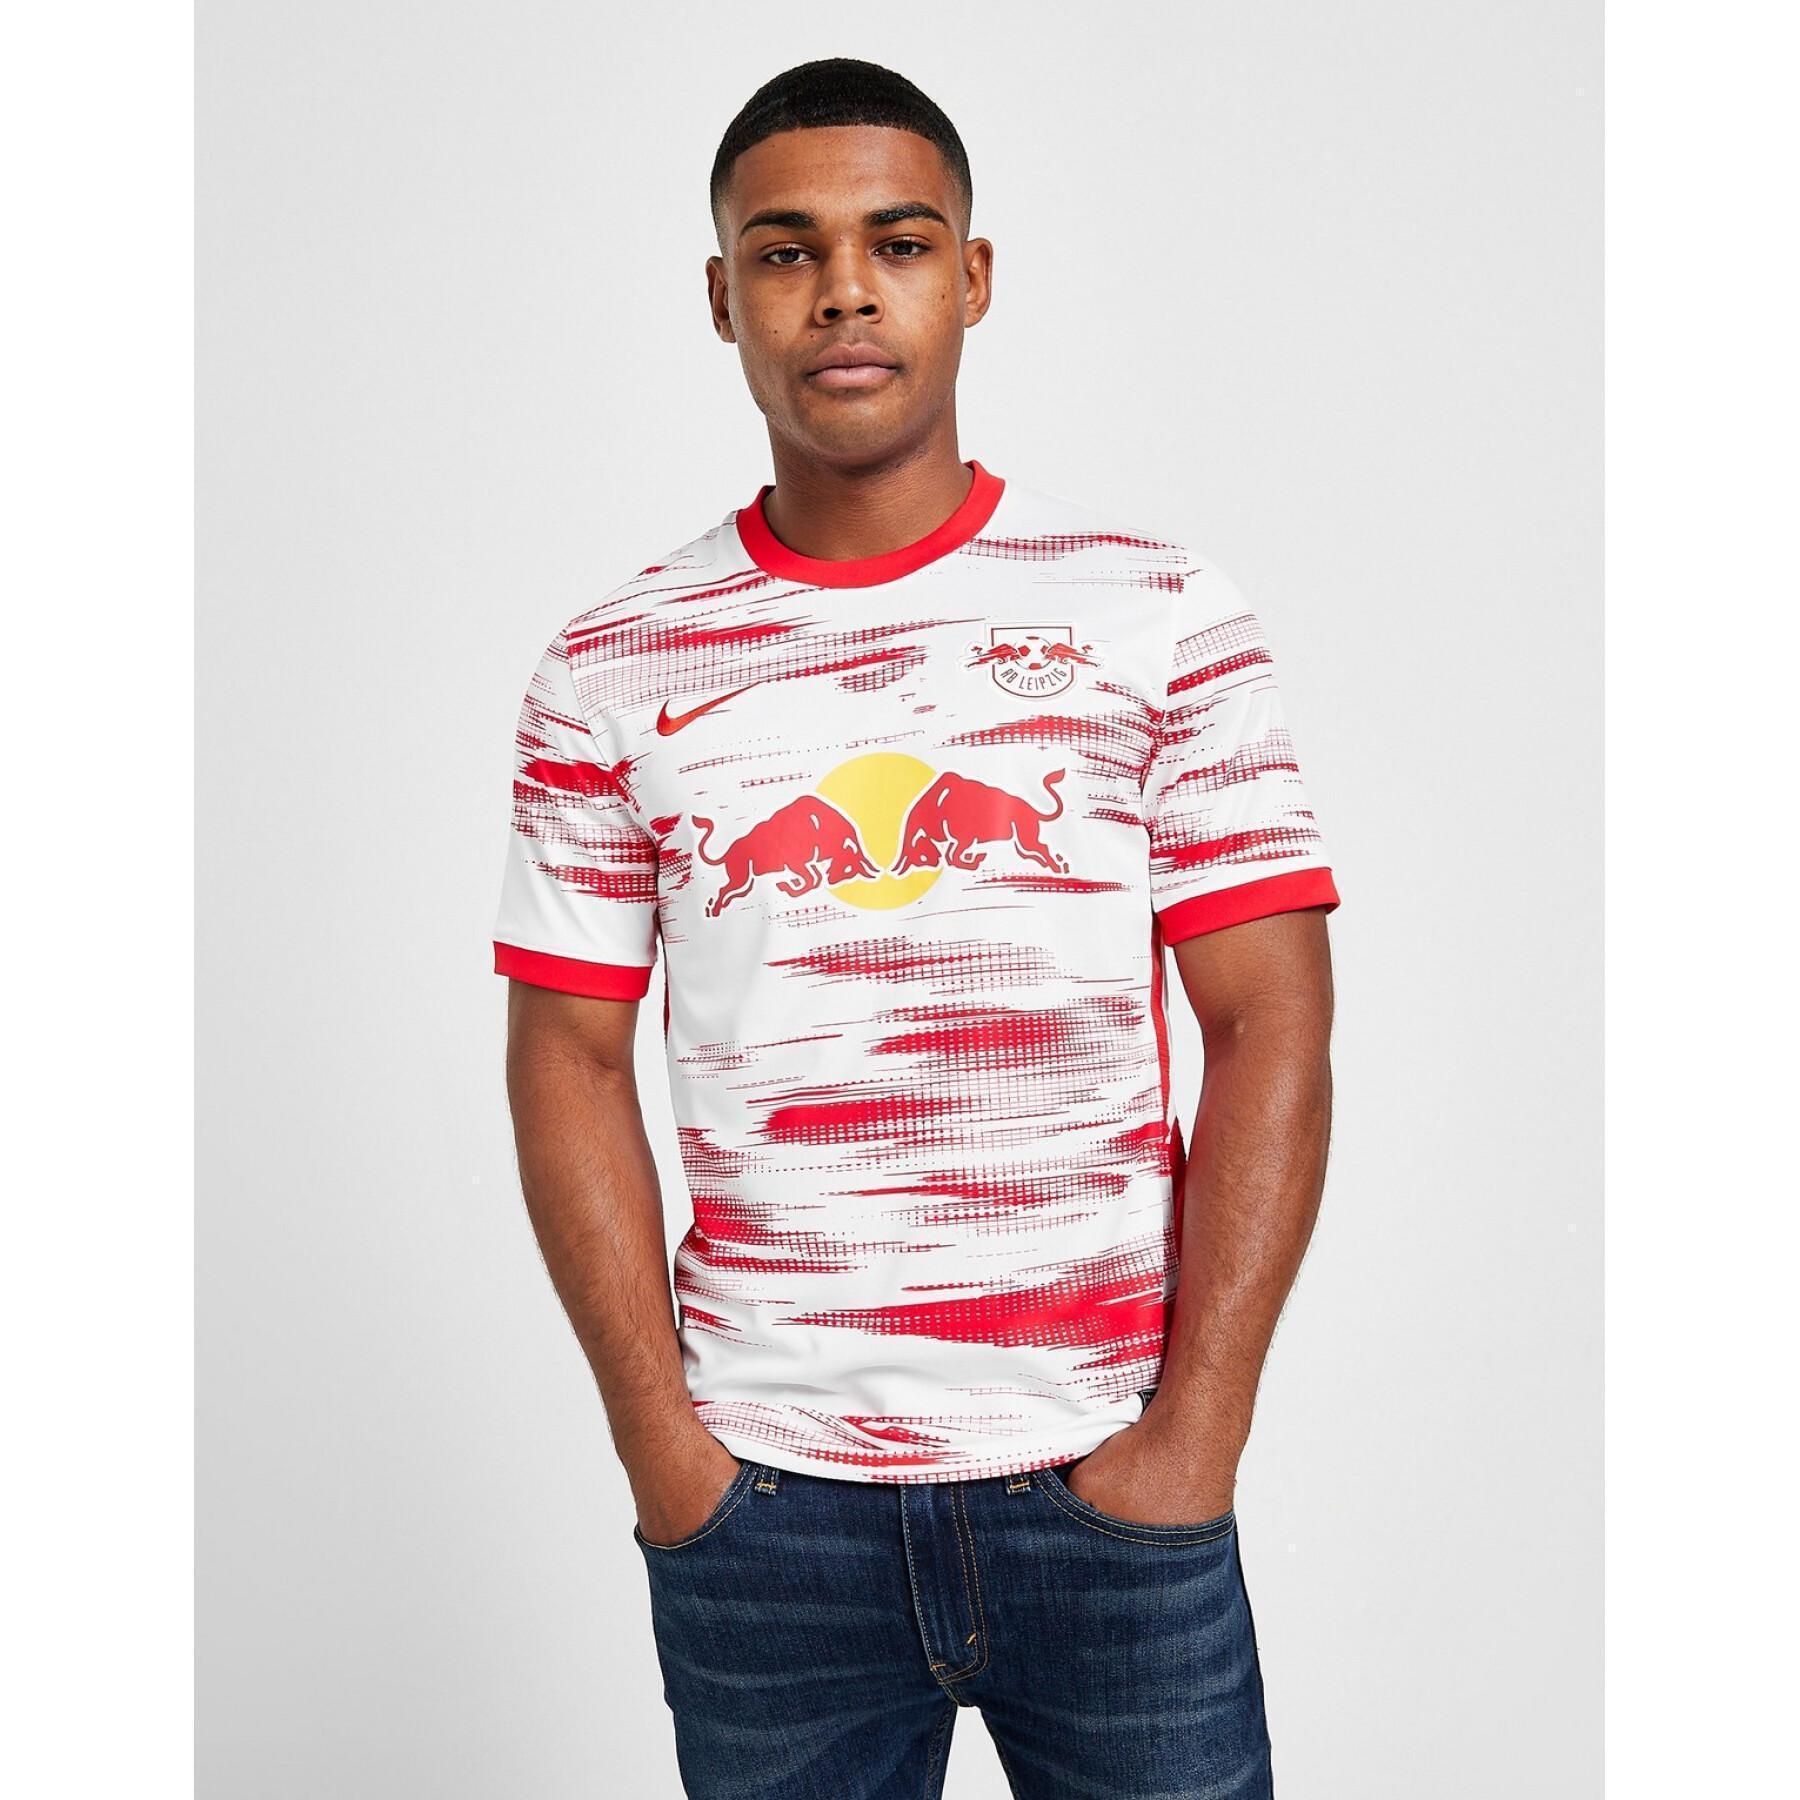 Home jersey RB Leipzig 2021/22